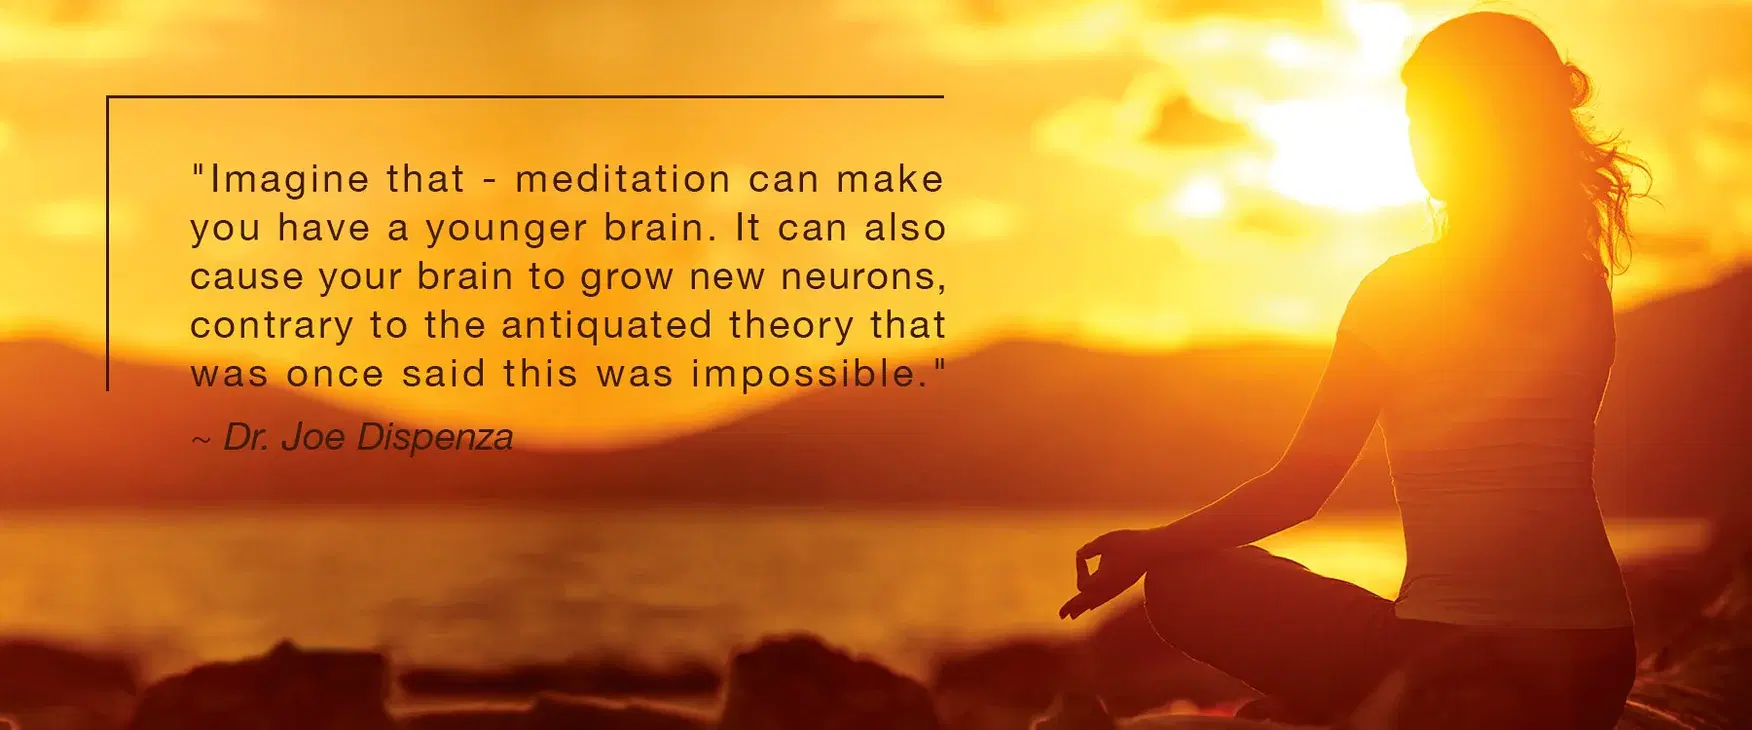 New Studies Continuously Point to the Efficacy of Meditation